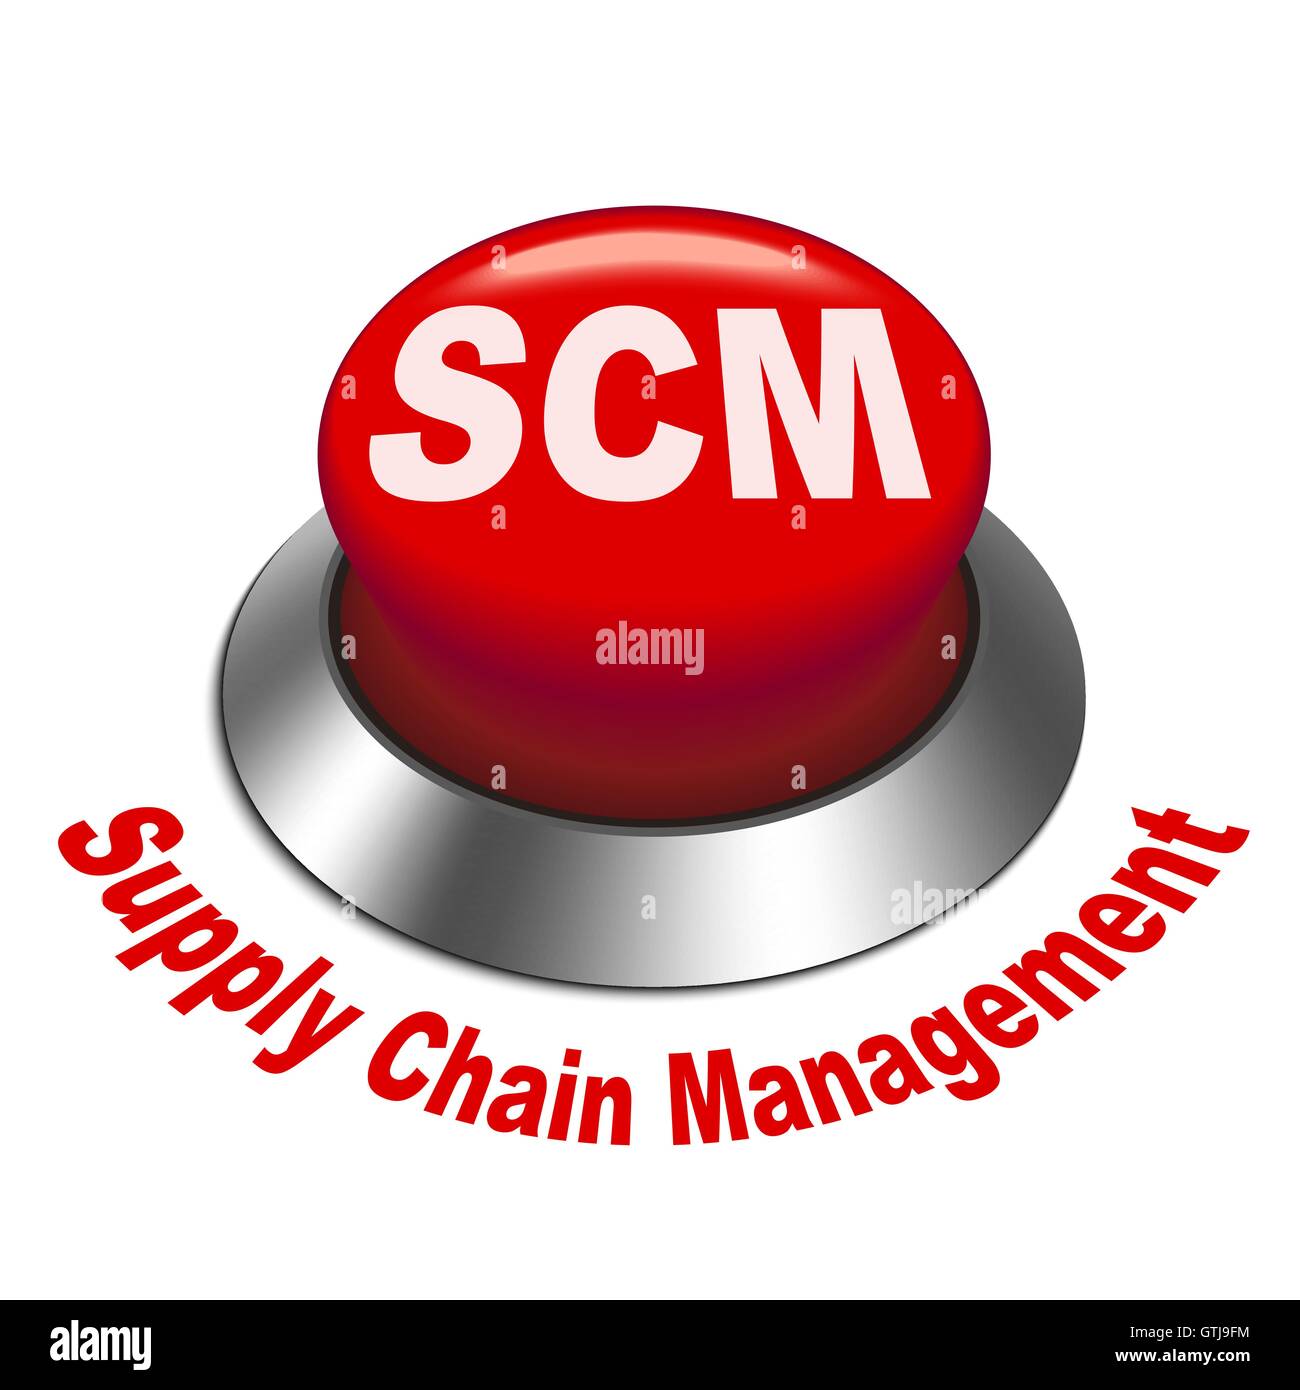 Scm Supply Chain Management Acronym Cut Out Stock Images And Pictures Alamy